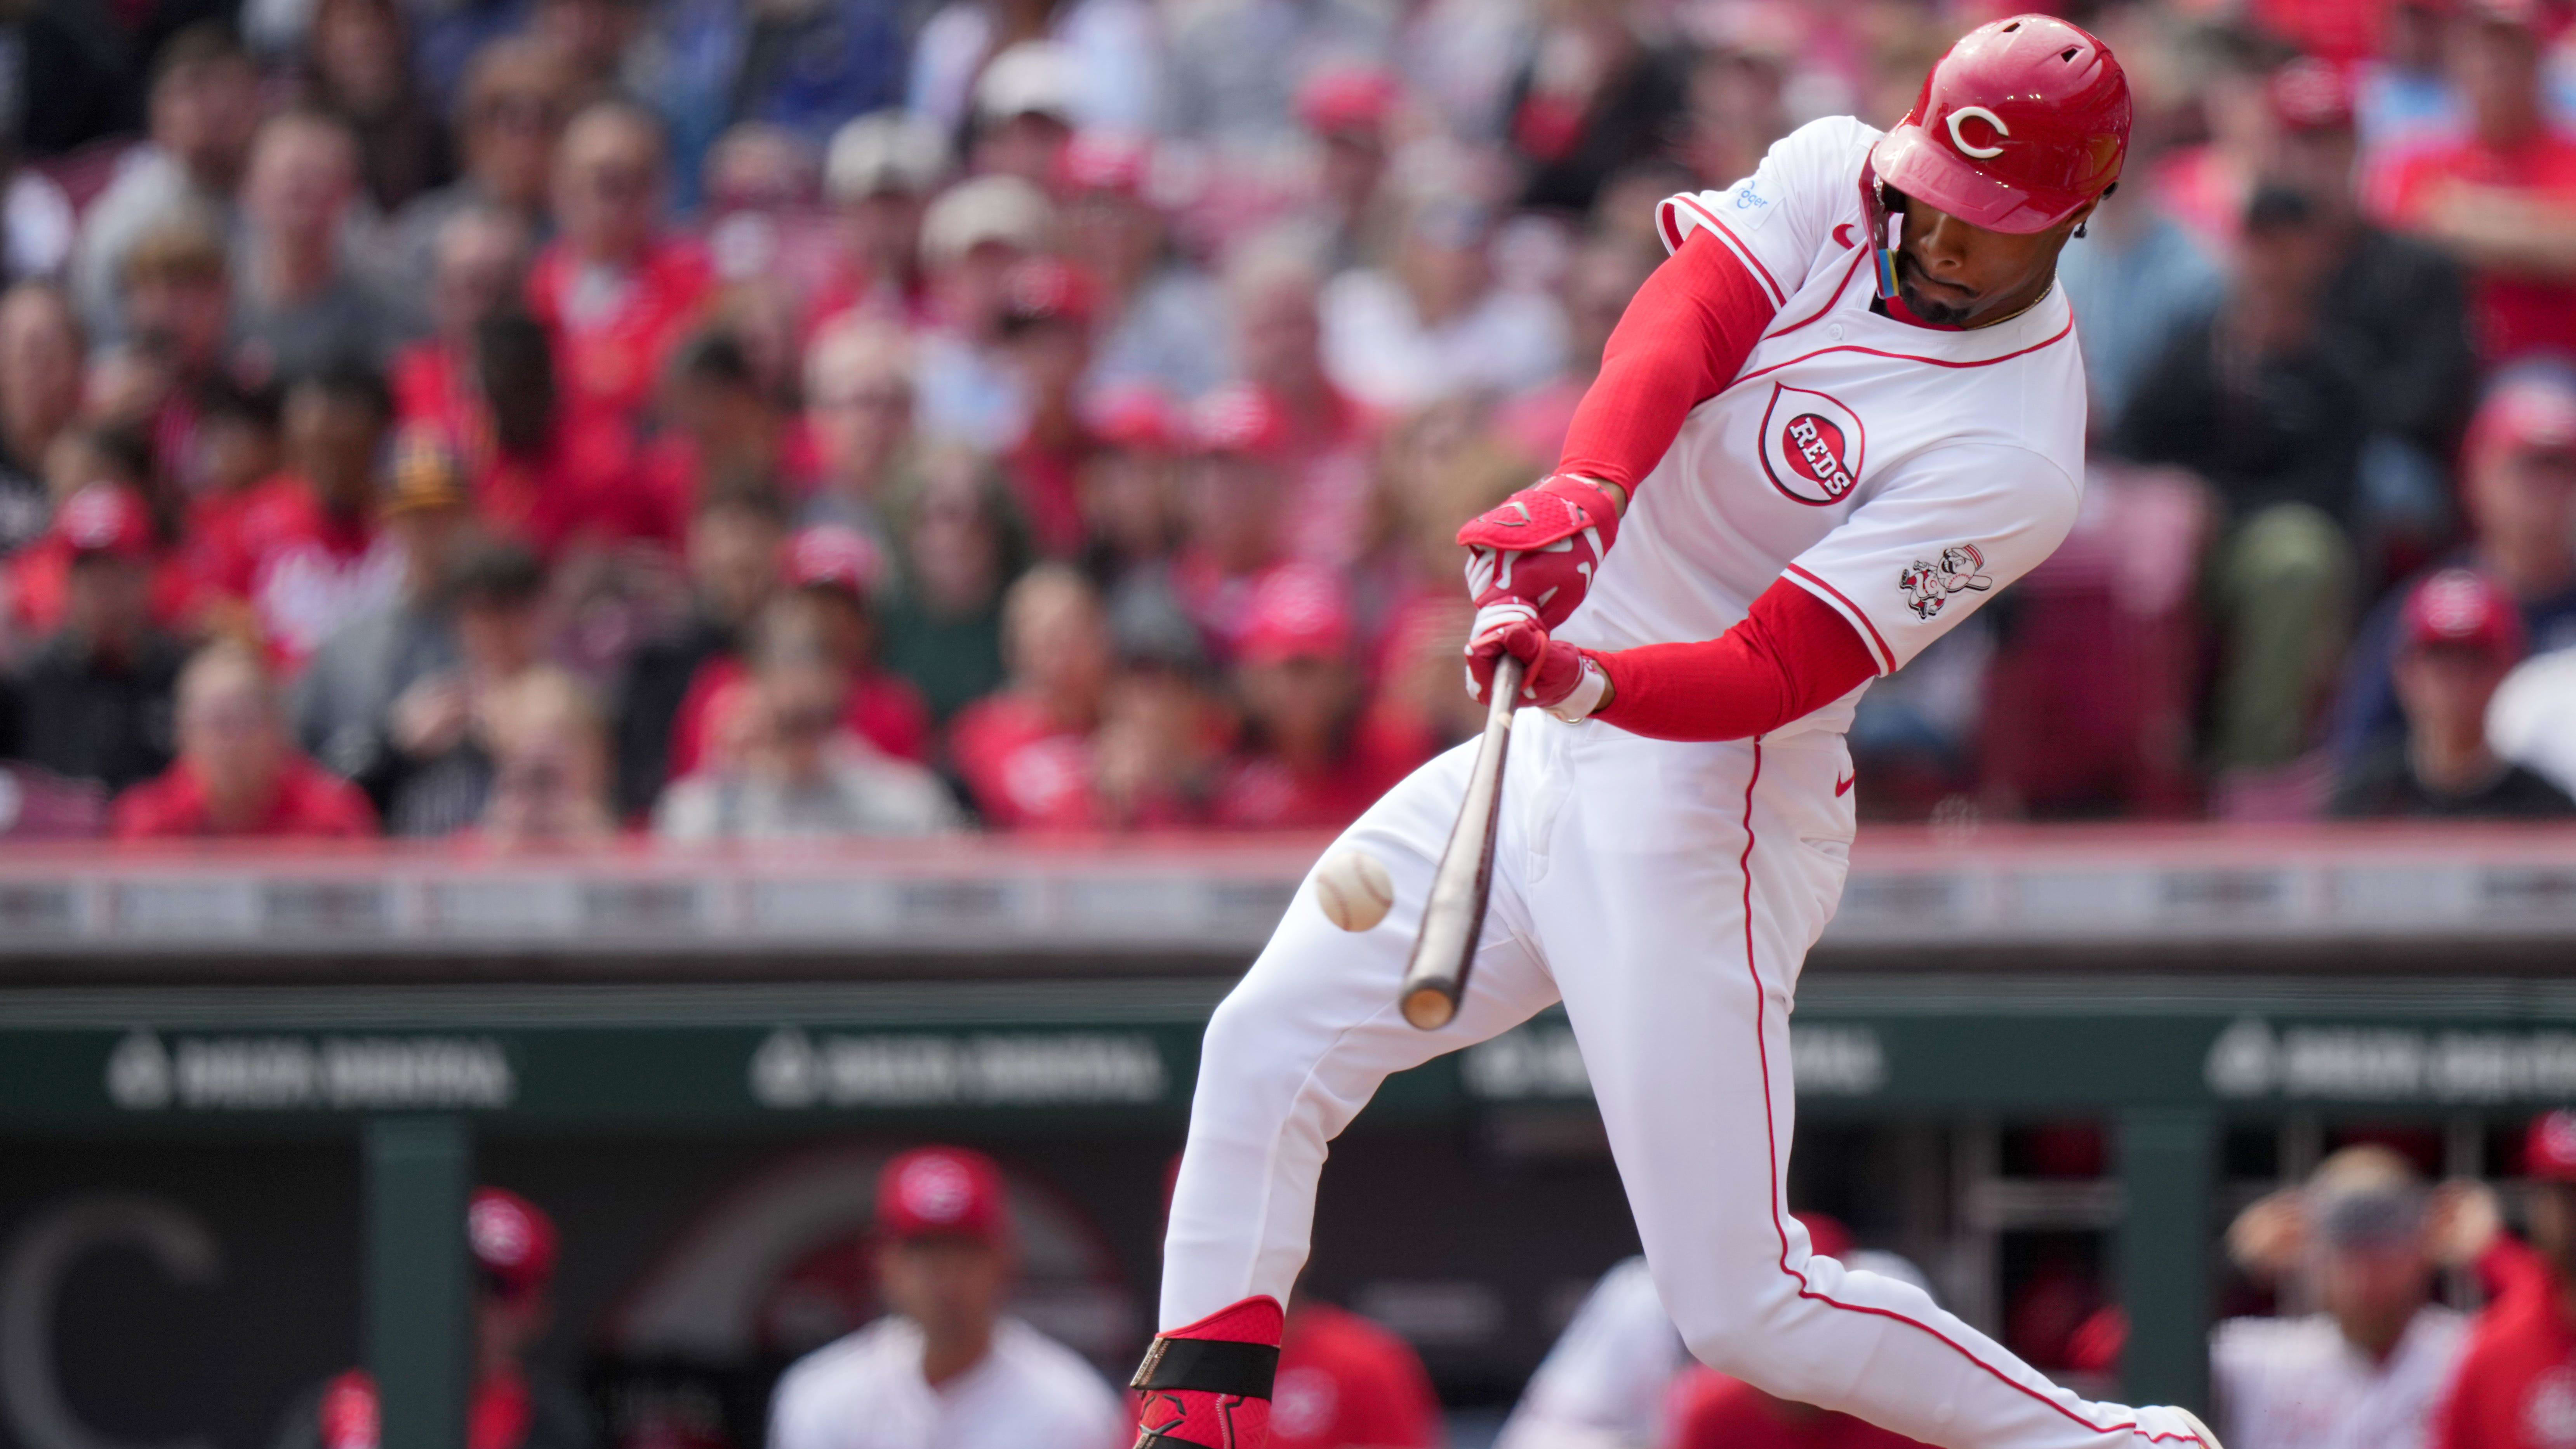 Cincinnati Reds center fielder Will Benson (30) hits an RBI double in the third inning against the Washington Nationals.